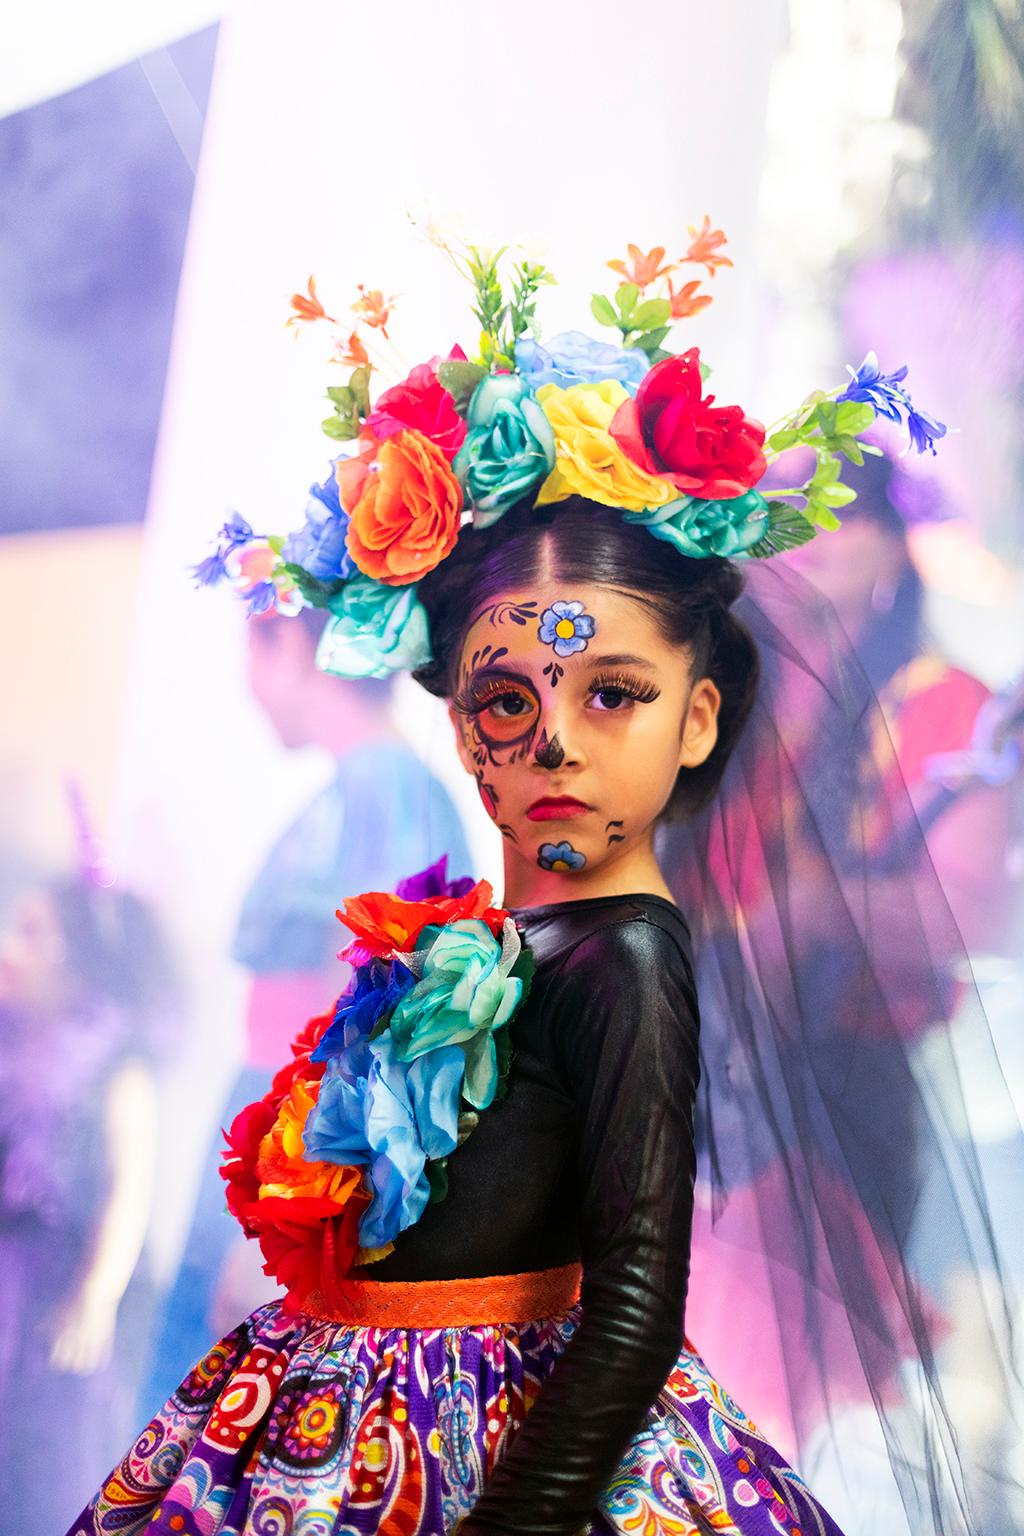  She has attitude! Dressed for Day of the Dead, Dia de los Muertos, Mexico, 2023 For Sale 1